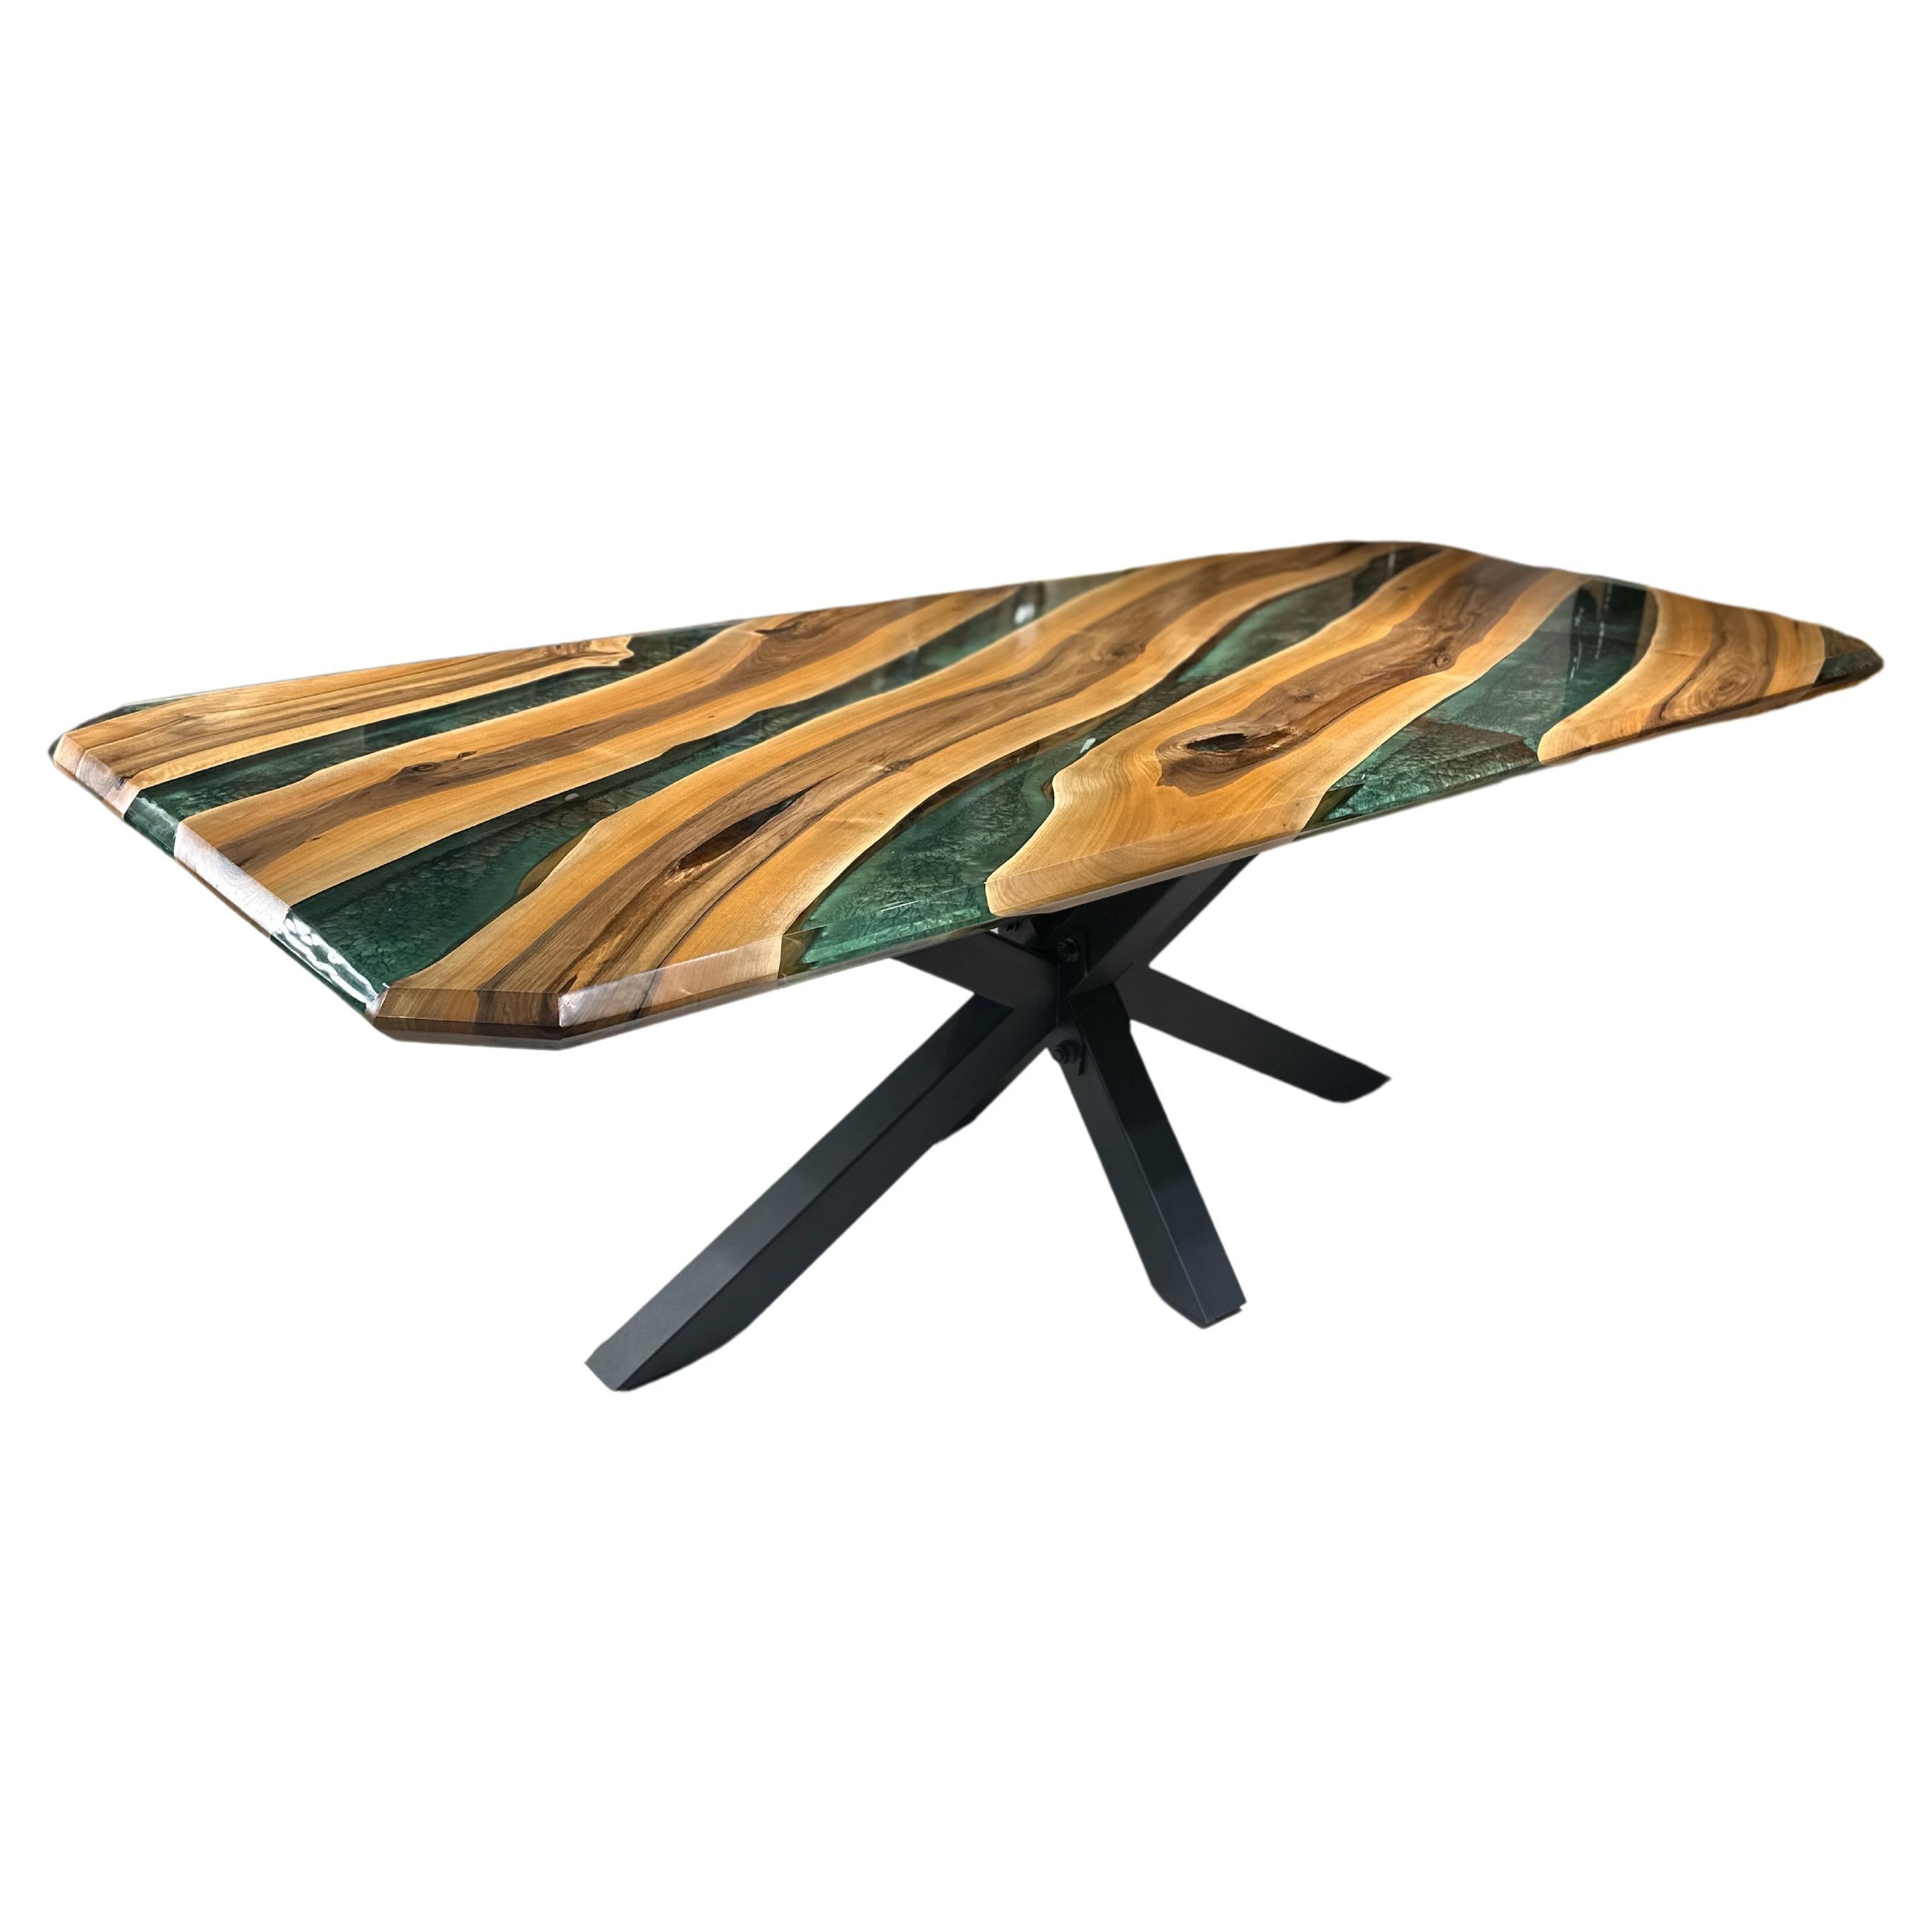 Green Epoxy Resin River Walnut Dining Table For Sale